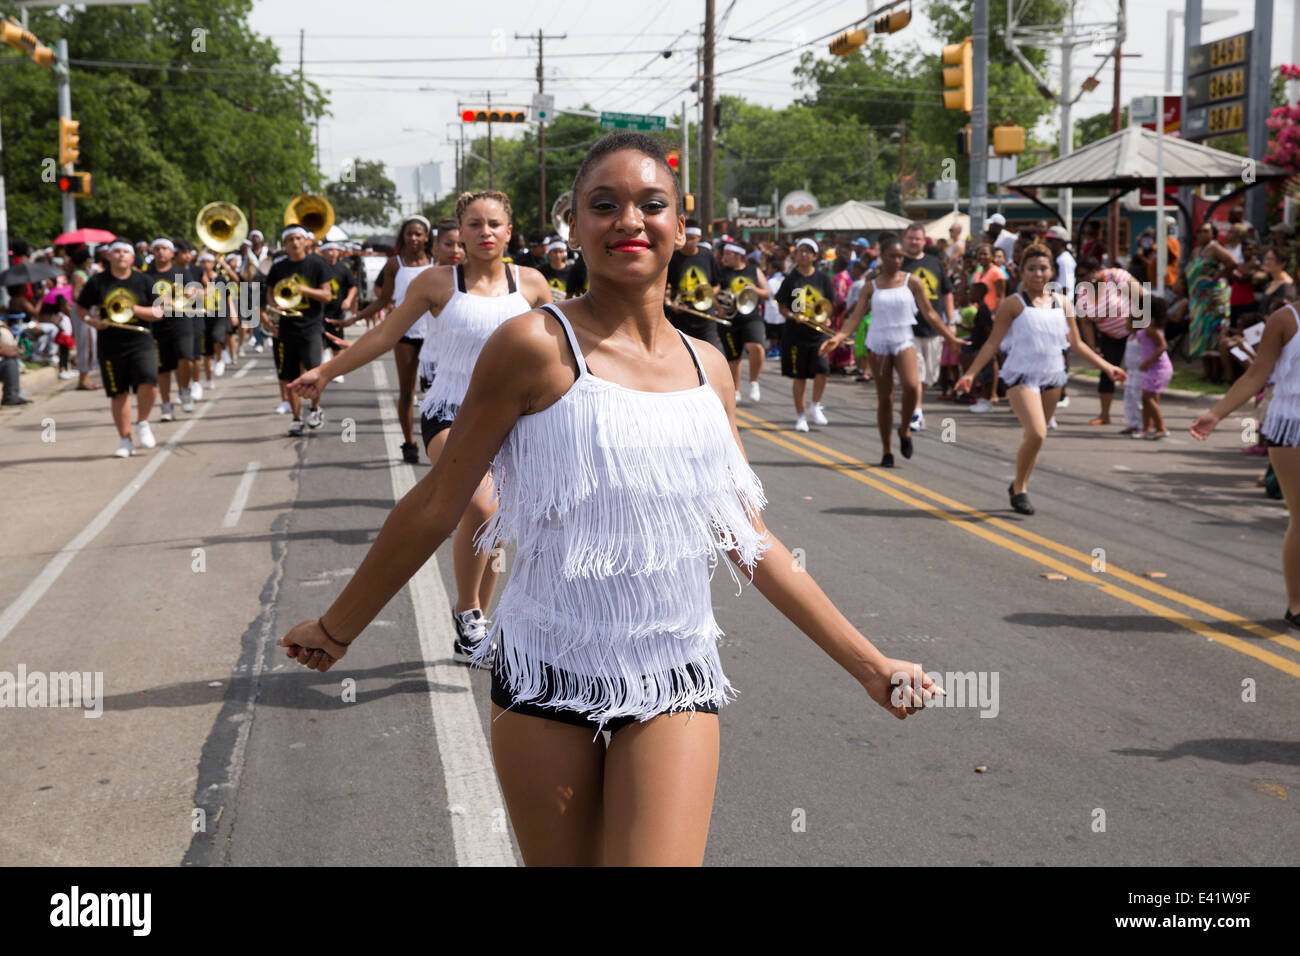 Juneteenth parade in Austin, Texas includes marching bands, crowds, dancers, politicians and police. Stock Photo